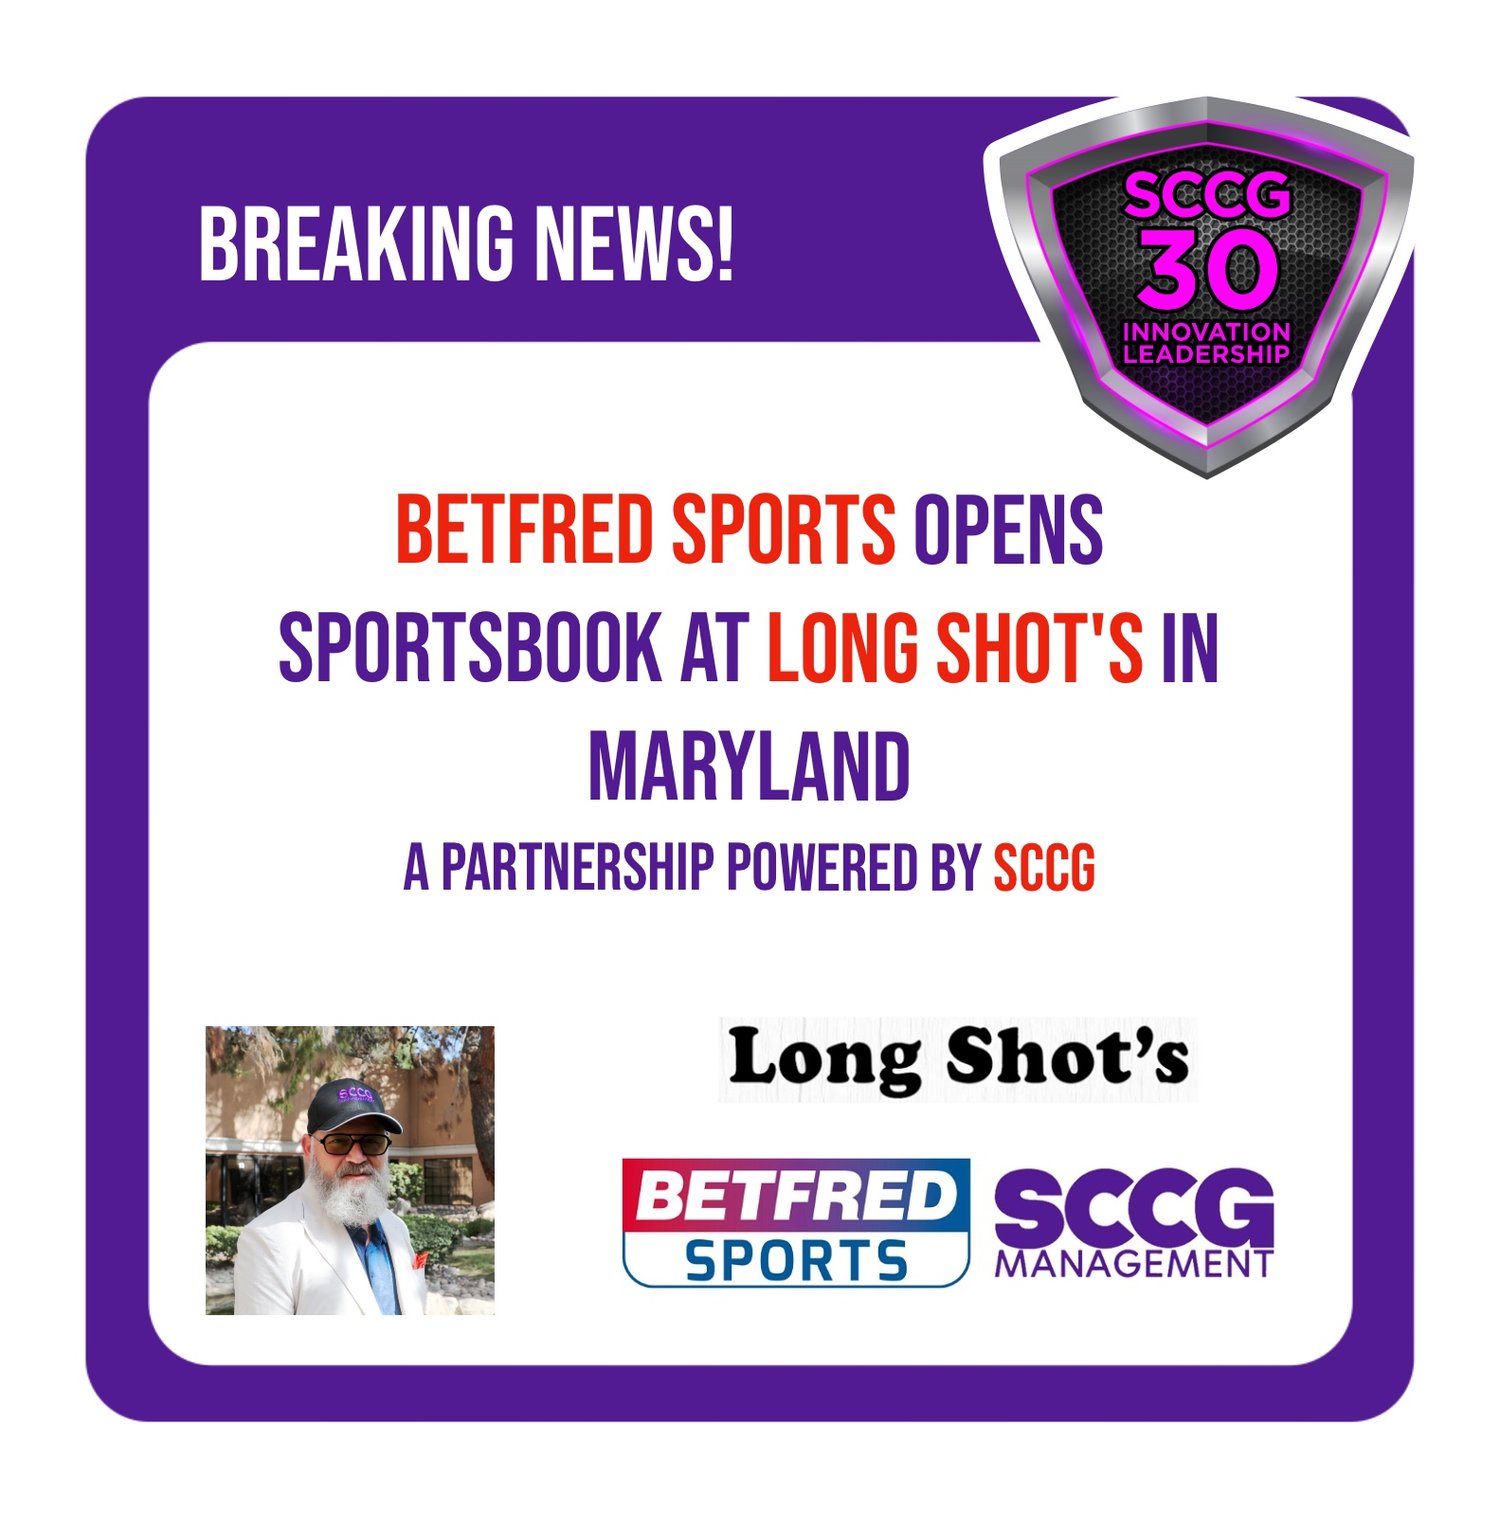 Betfred Sports and Long Shot's Open New Bookmaker in Maryland - Partnership Powered by SCCG